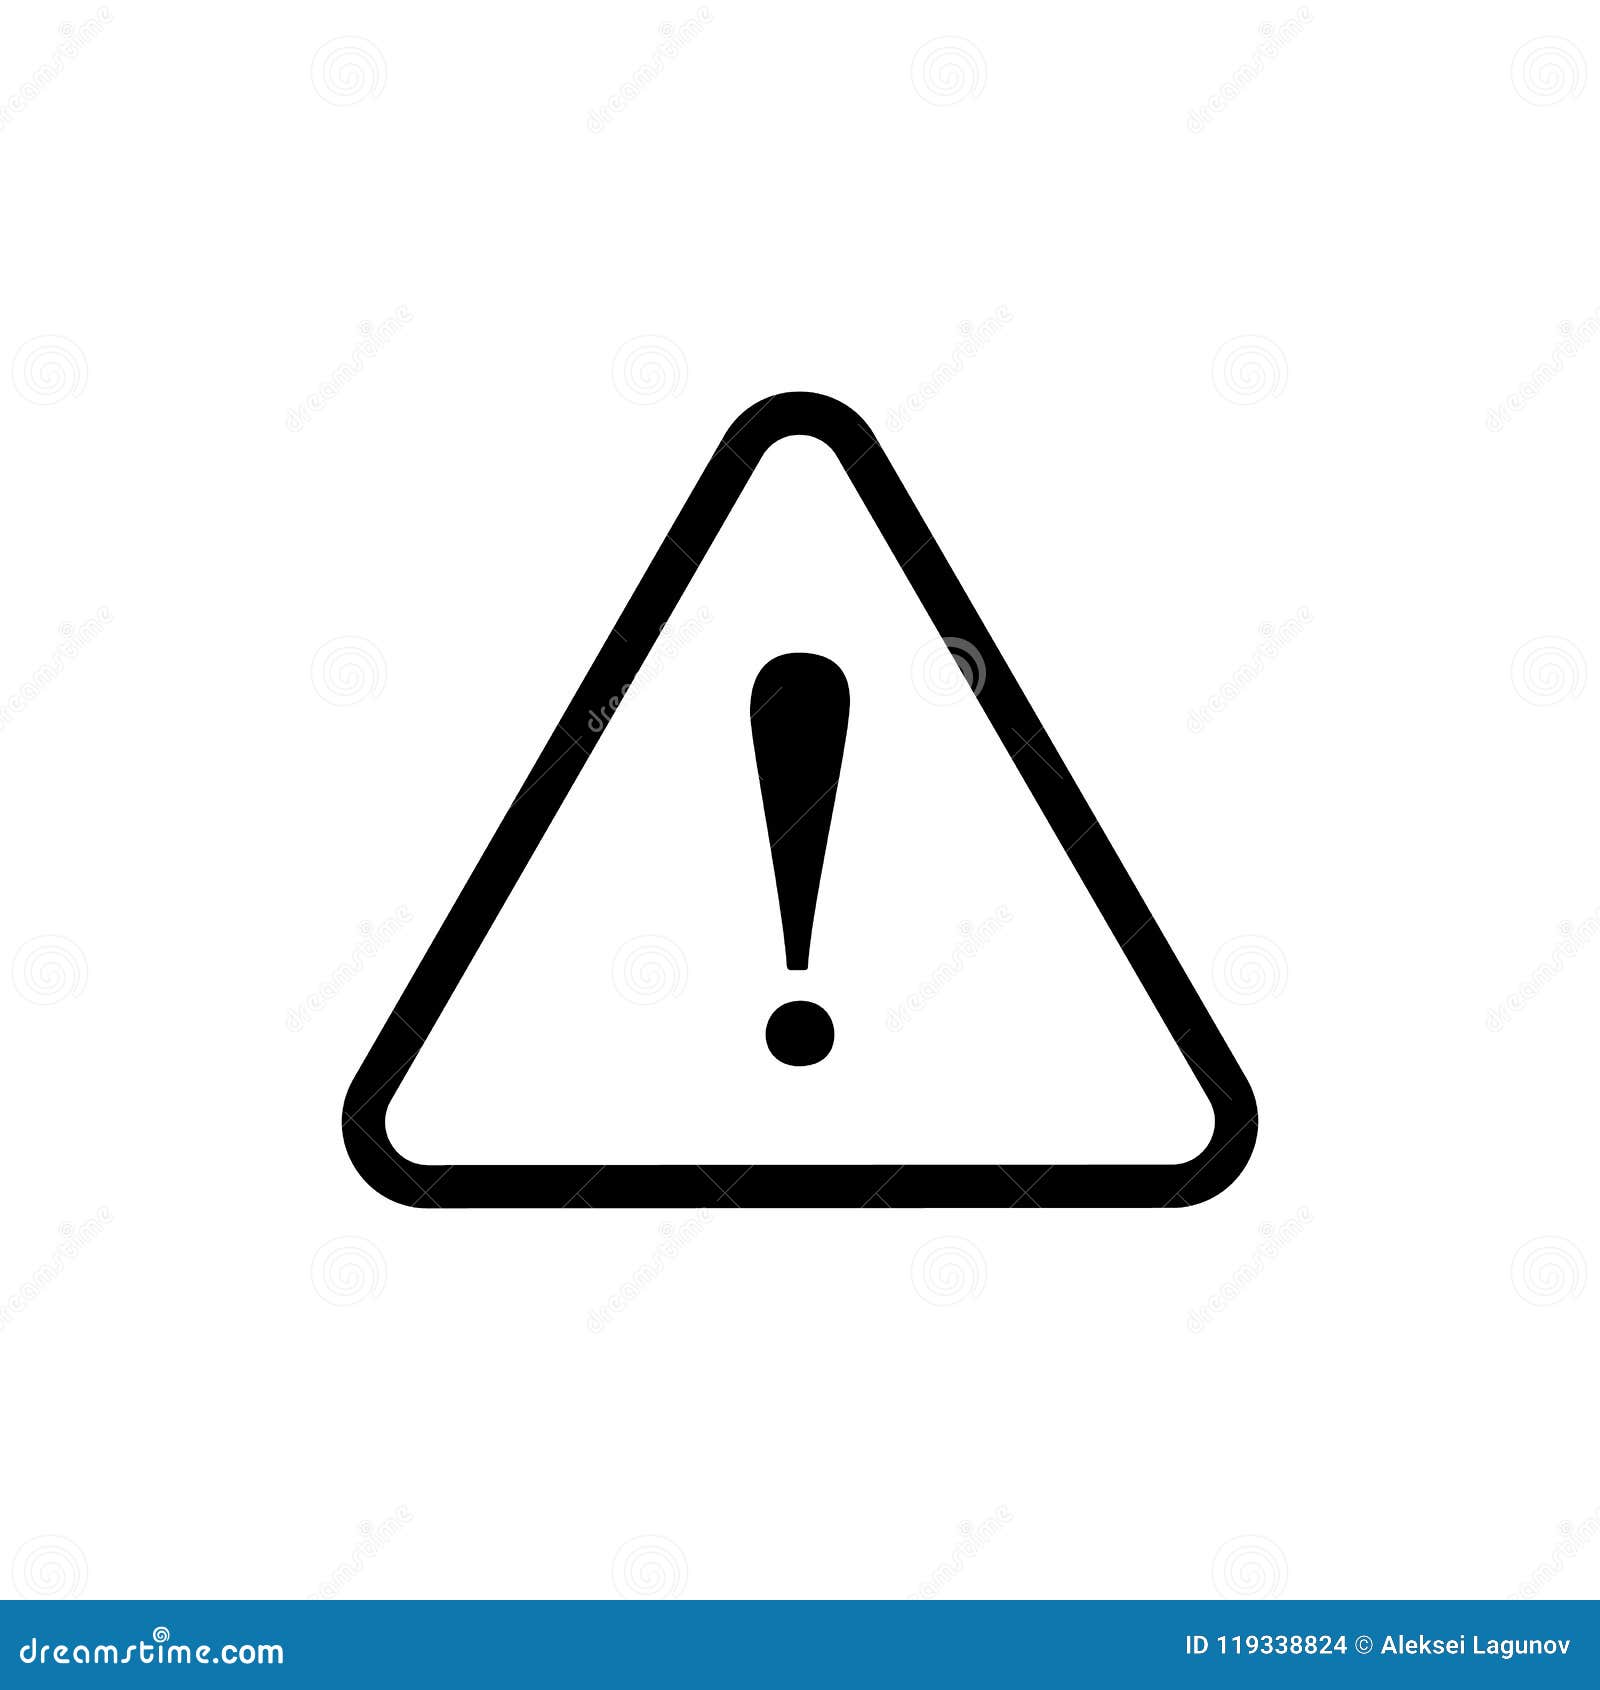  caution warning sign, triangle and exclamation point, outline icon.